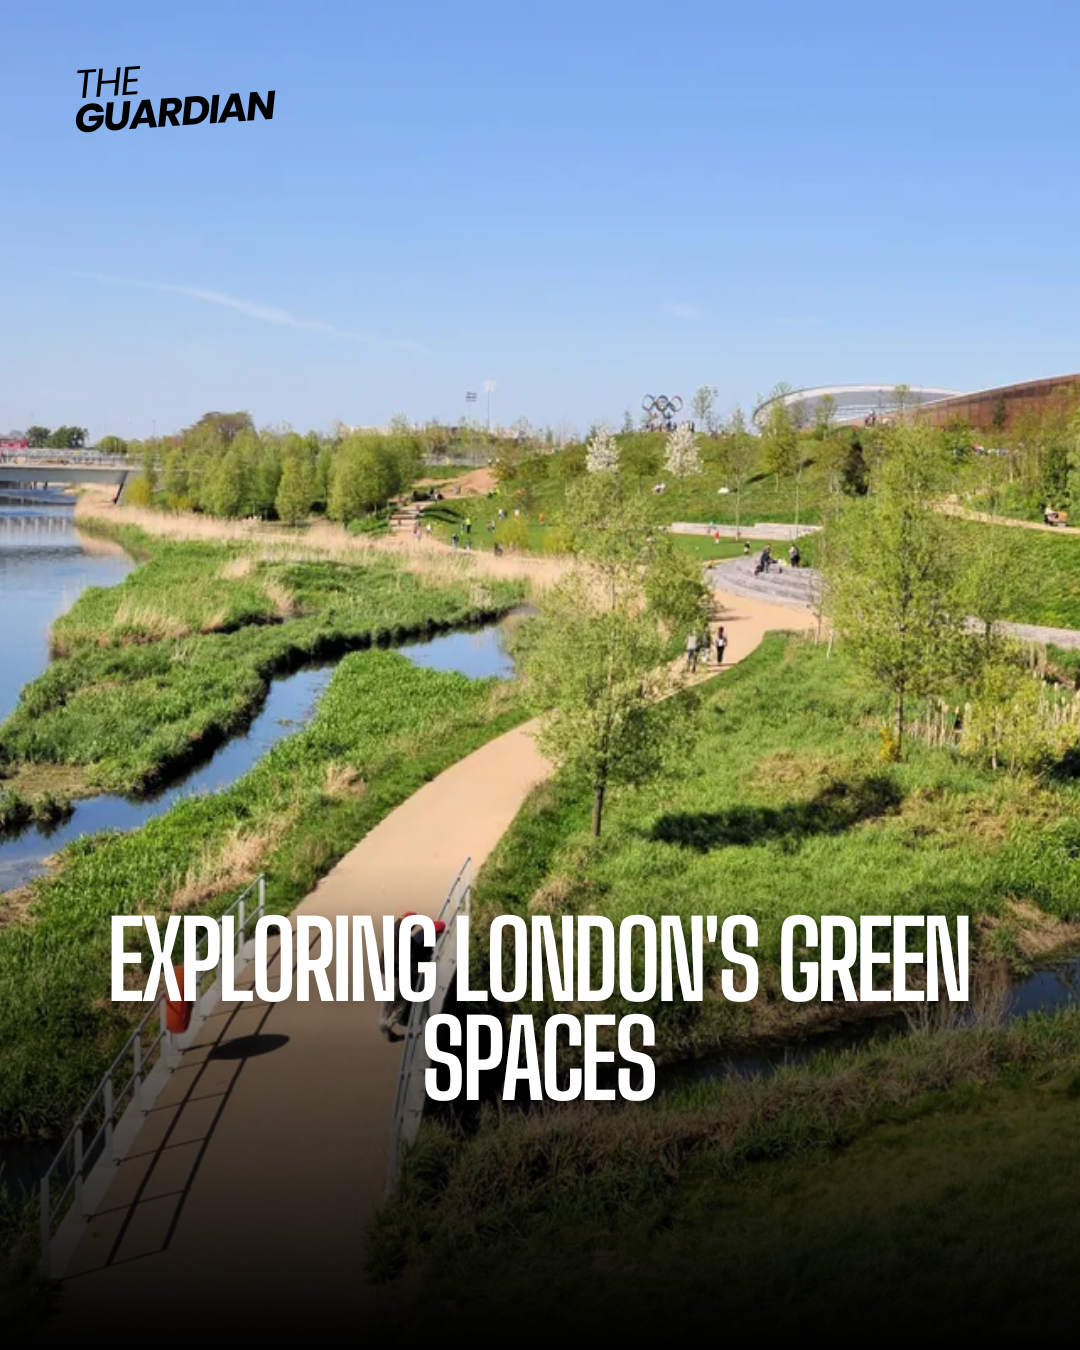 Dan Raven-Ellison is a "guerrilla explorer" who helped make London the planet's first National Park City. Here are his preferences for London's best green areas, from wetlands to forests.